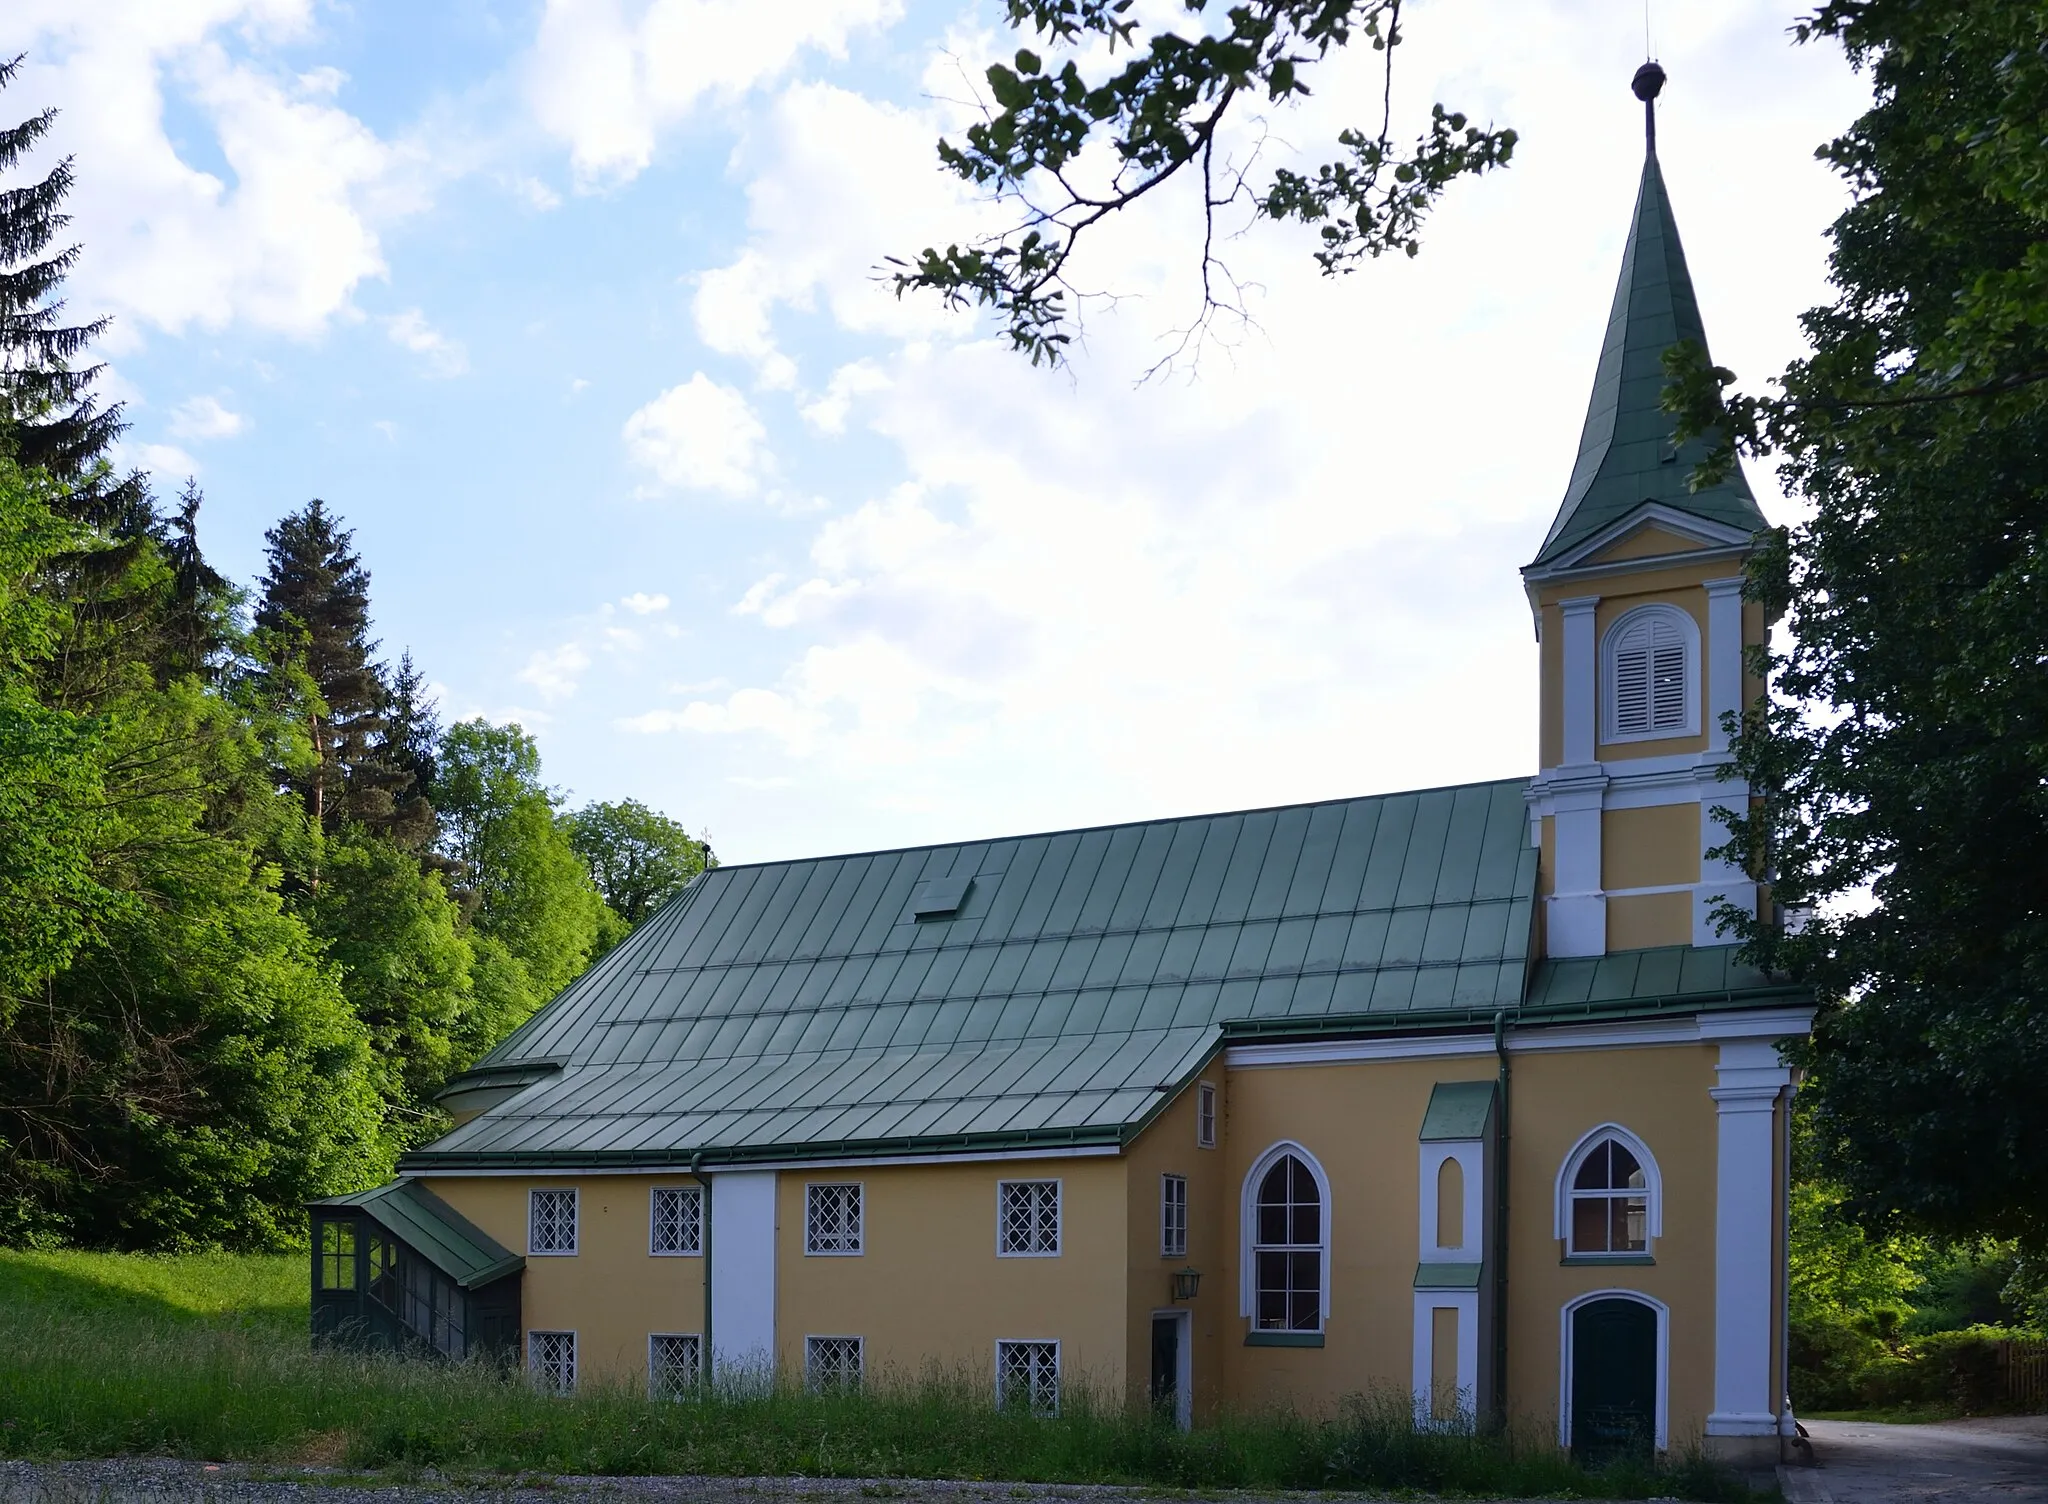 Photo showing: The parish church Assumption of Mary in Wald, municipality of Pyhra, Lower Austria, is protected as a cultural heritage monument.